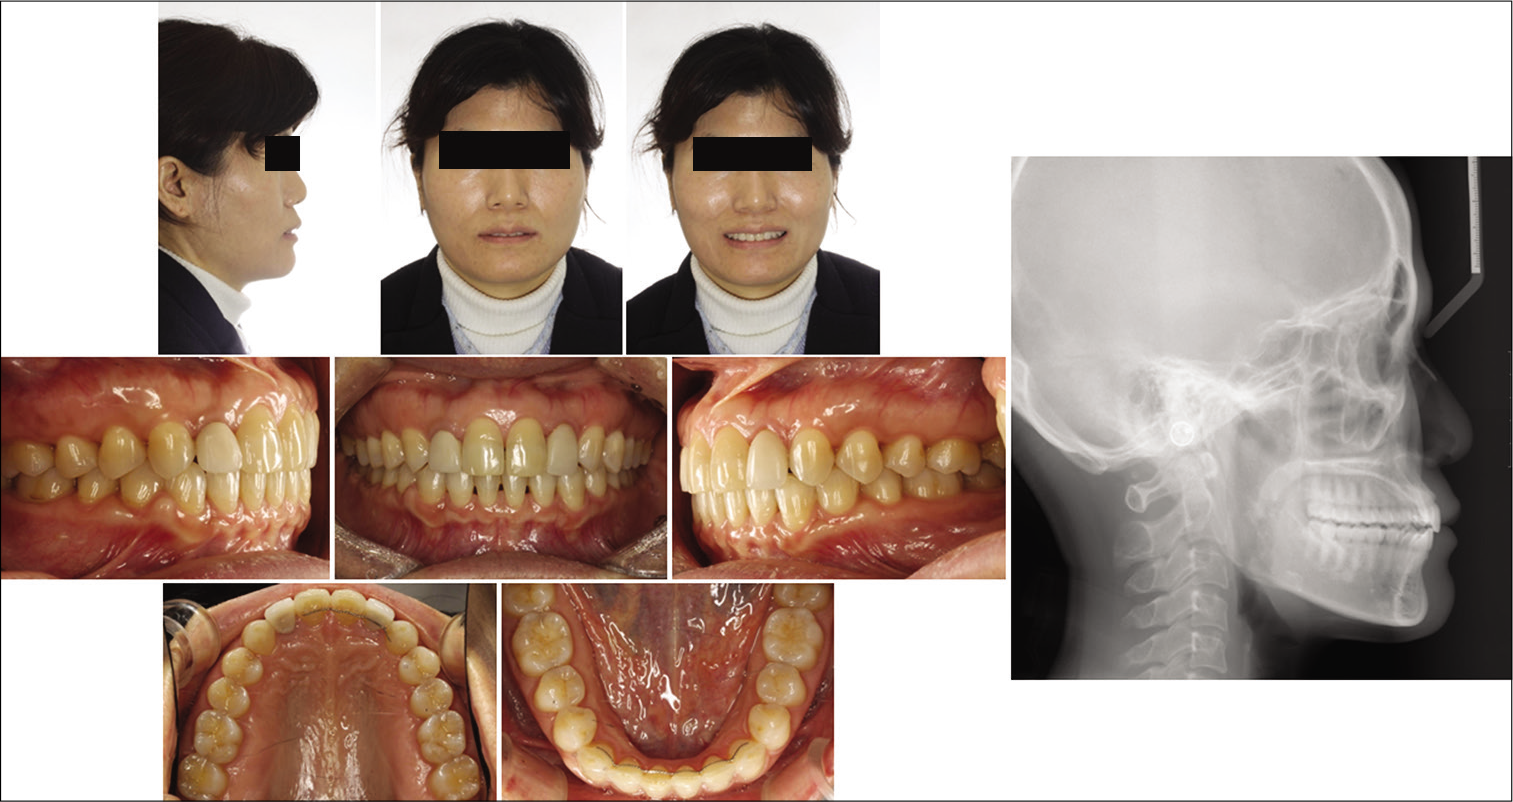 Pre-treatment photographs and lateral cephalogram after orthodontic treatment at the private orthodontic office.